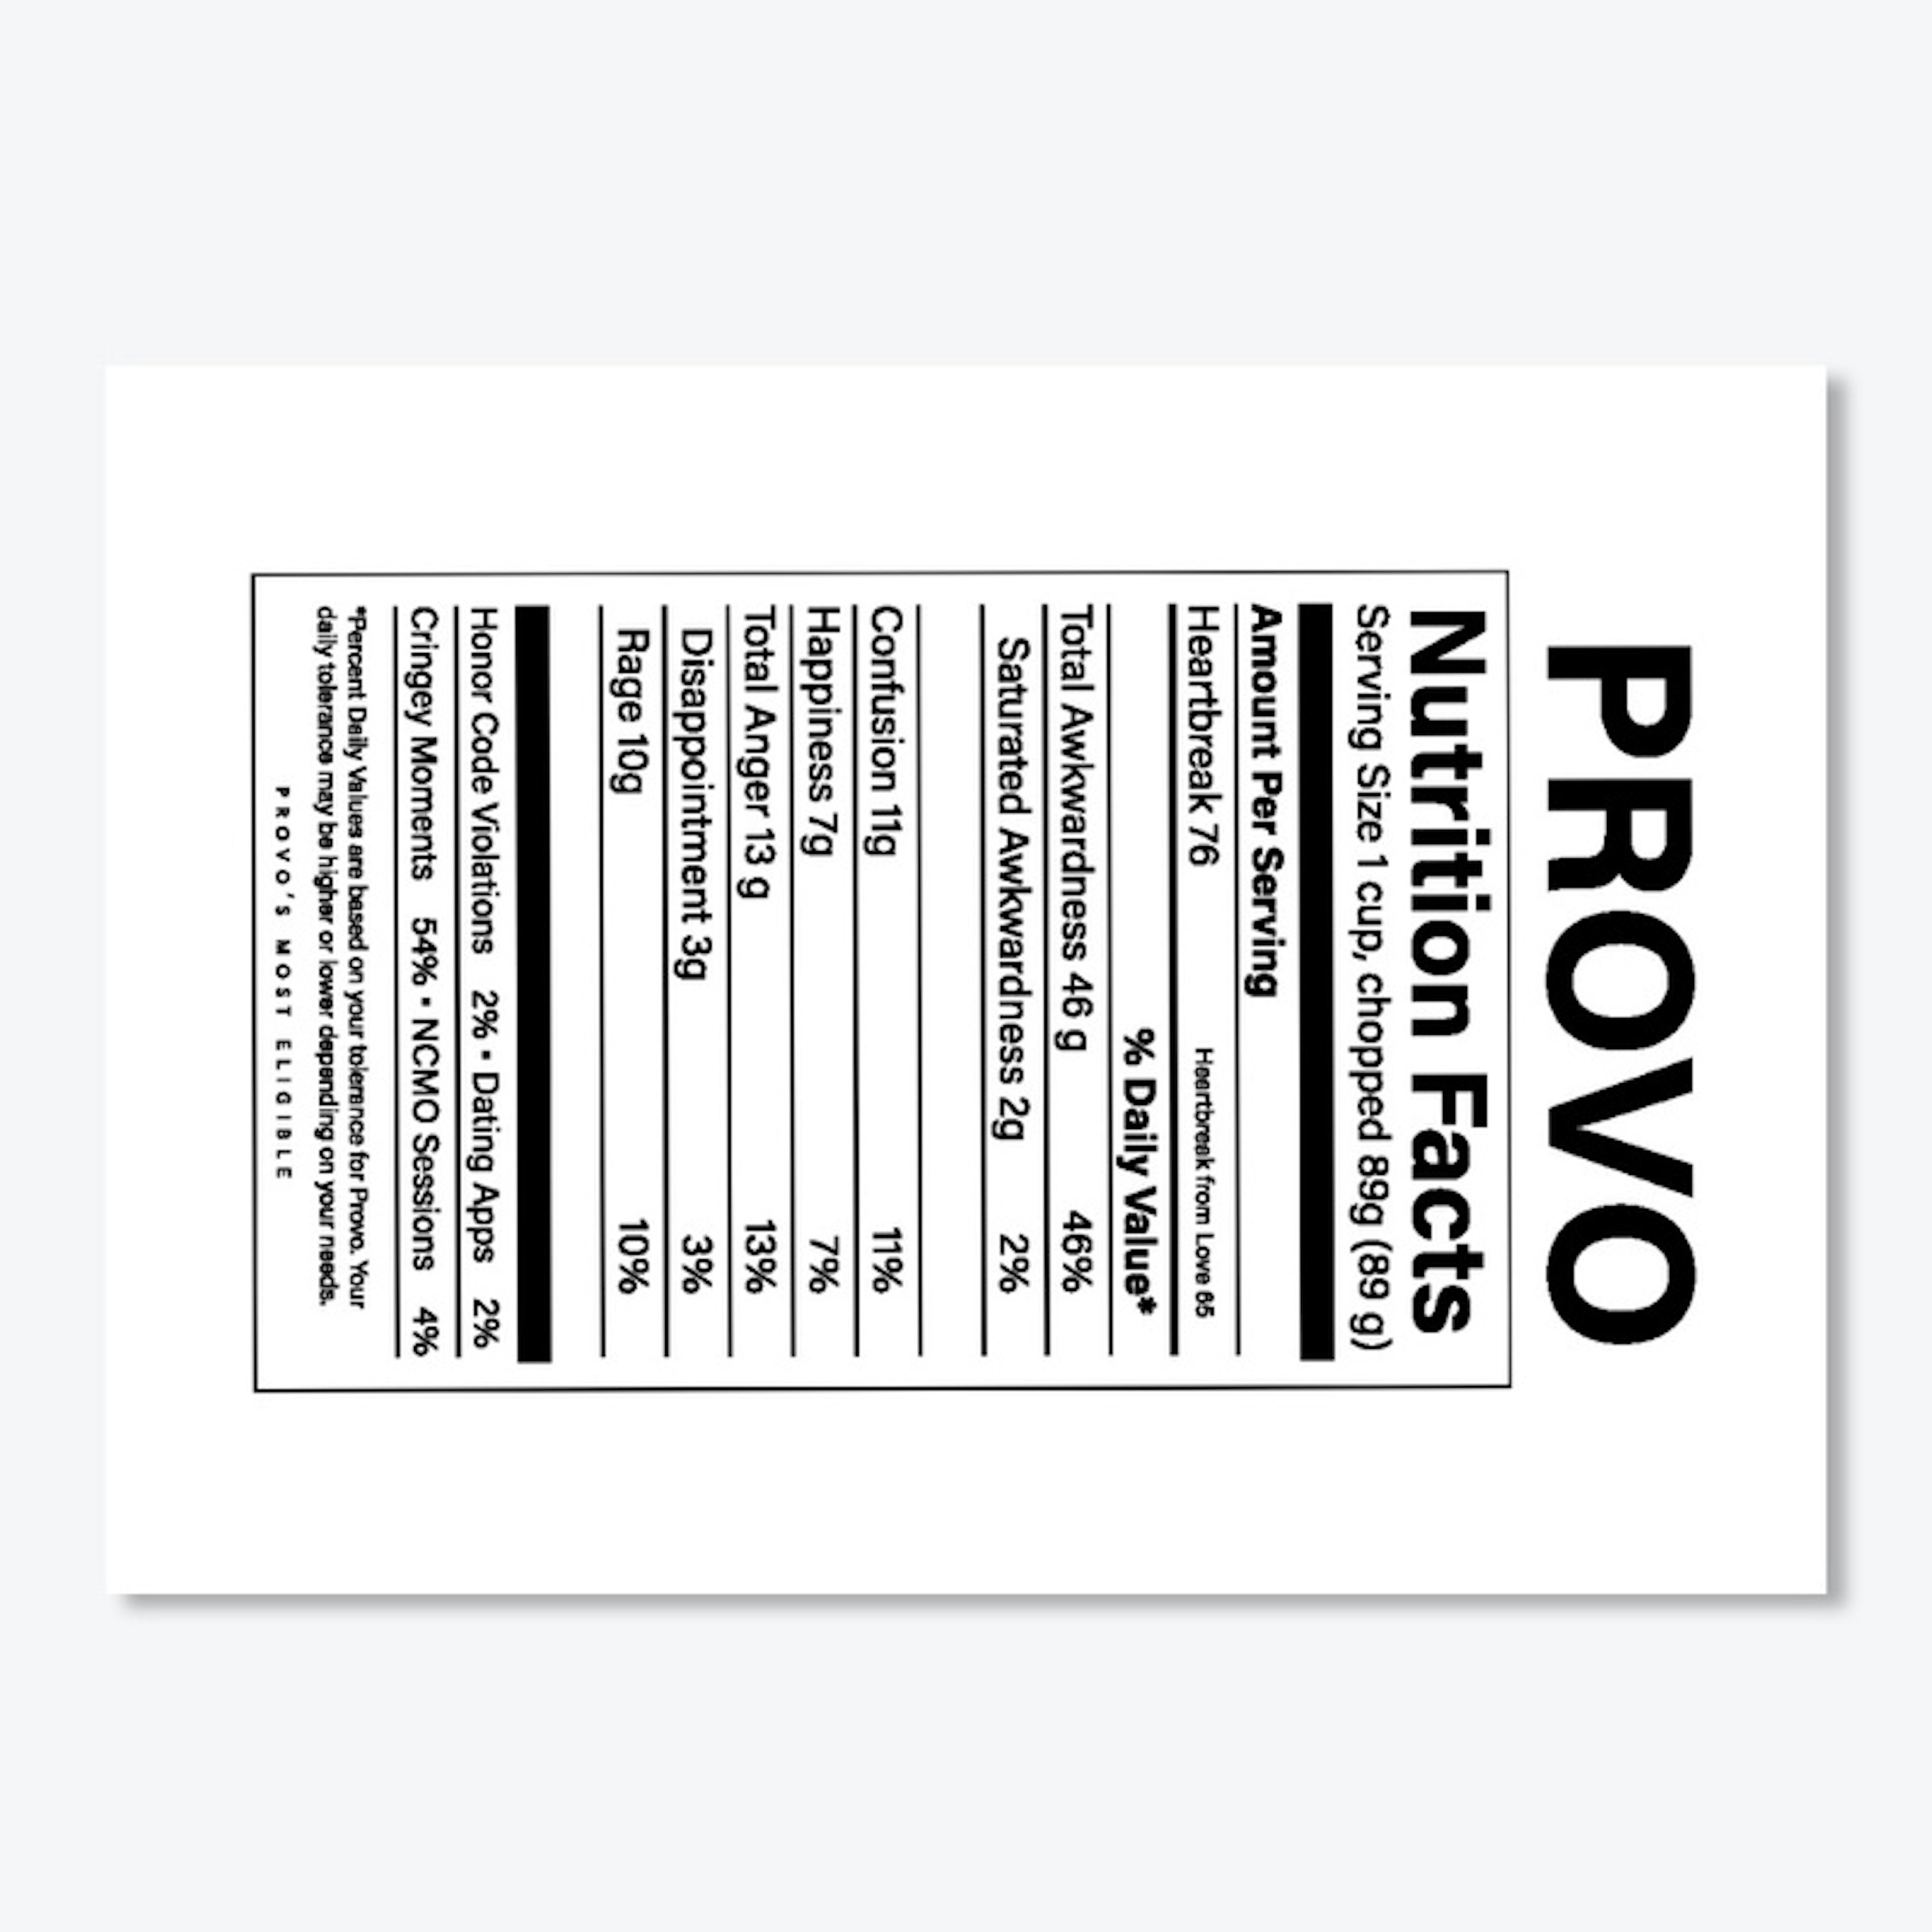 Provo Nutrition Facts